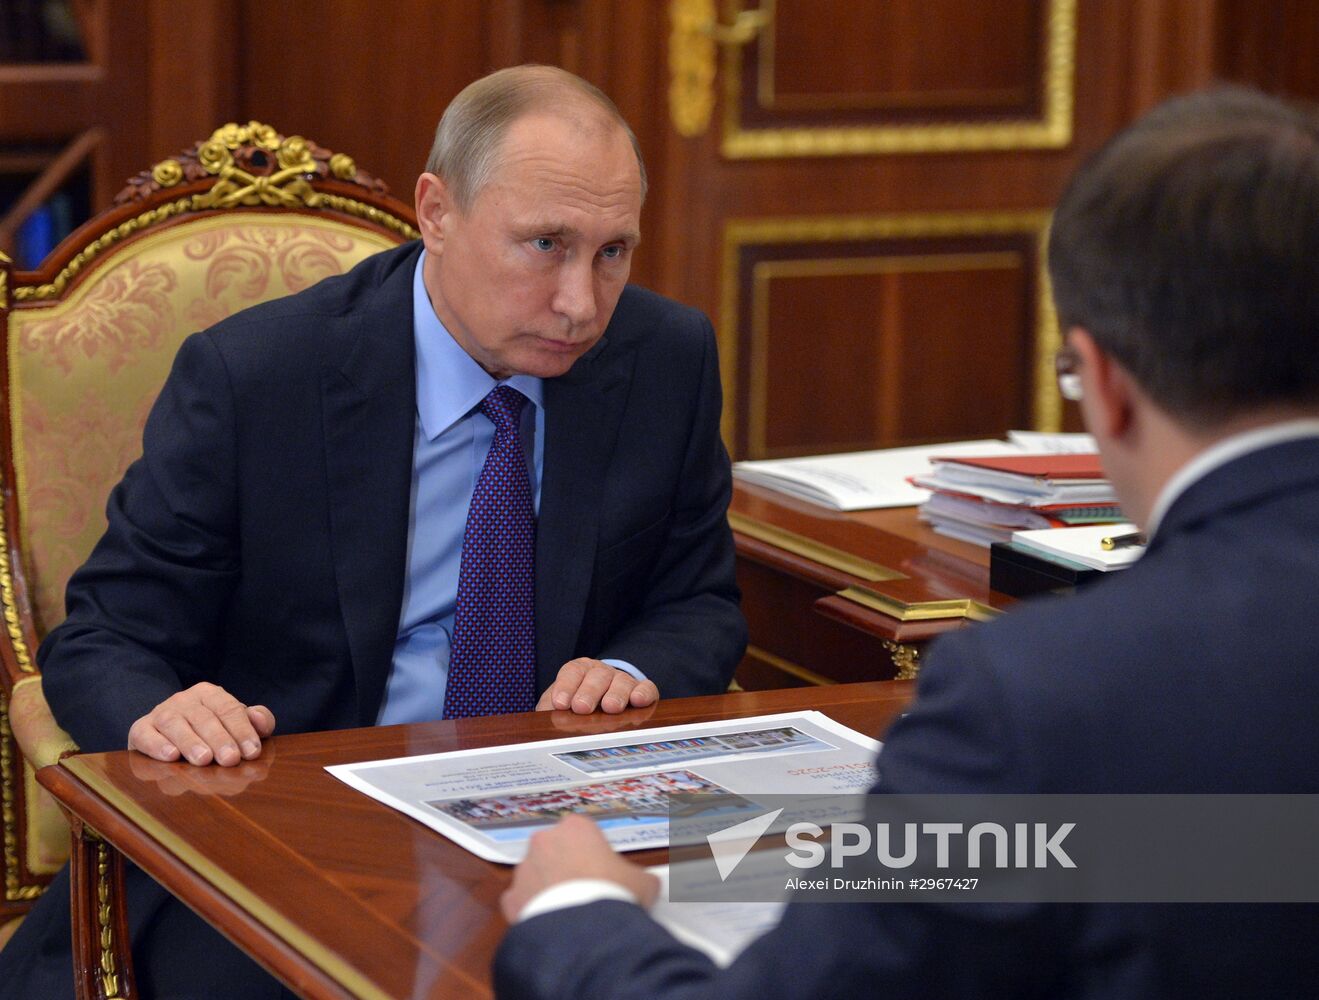 President Putin meets with Culture Minister Medinsky